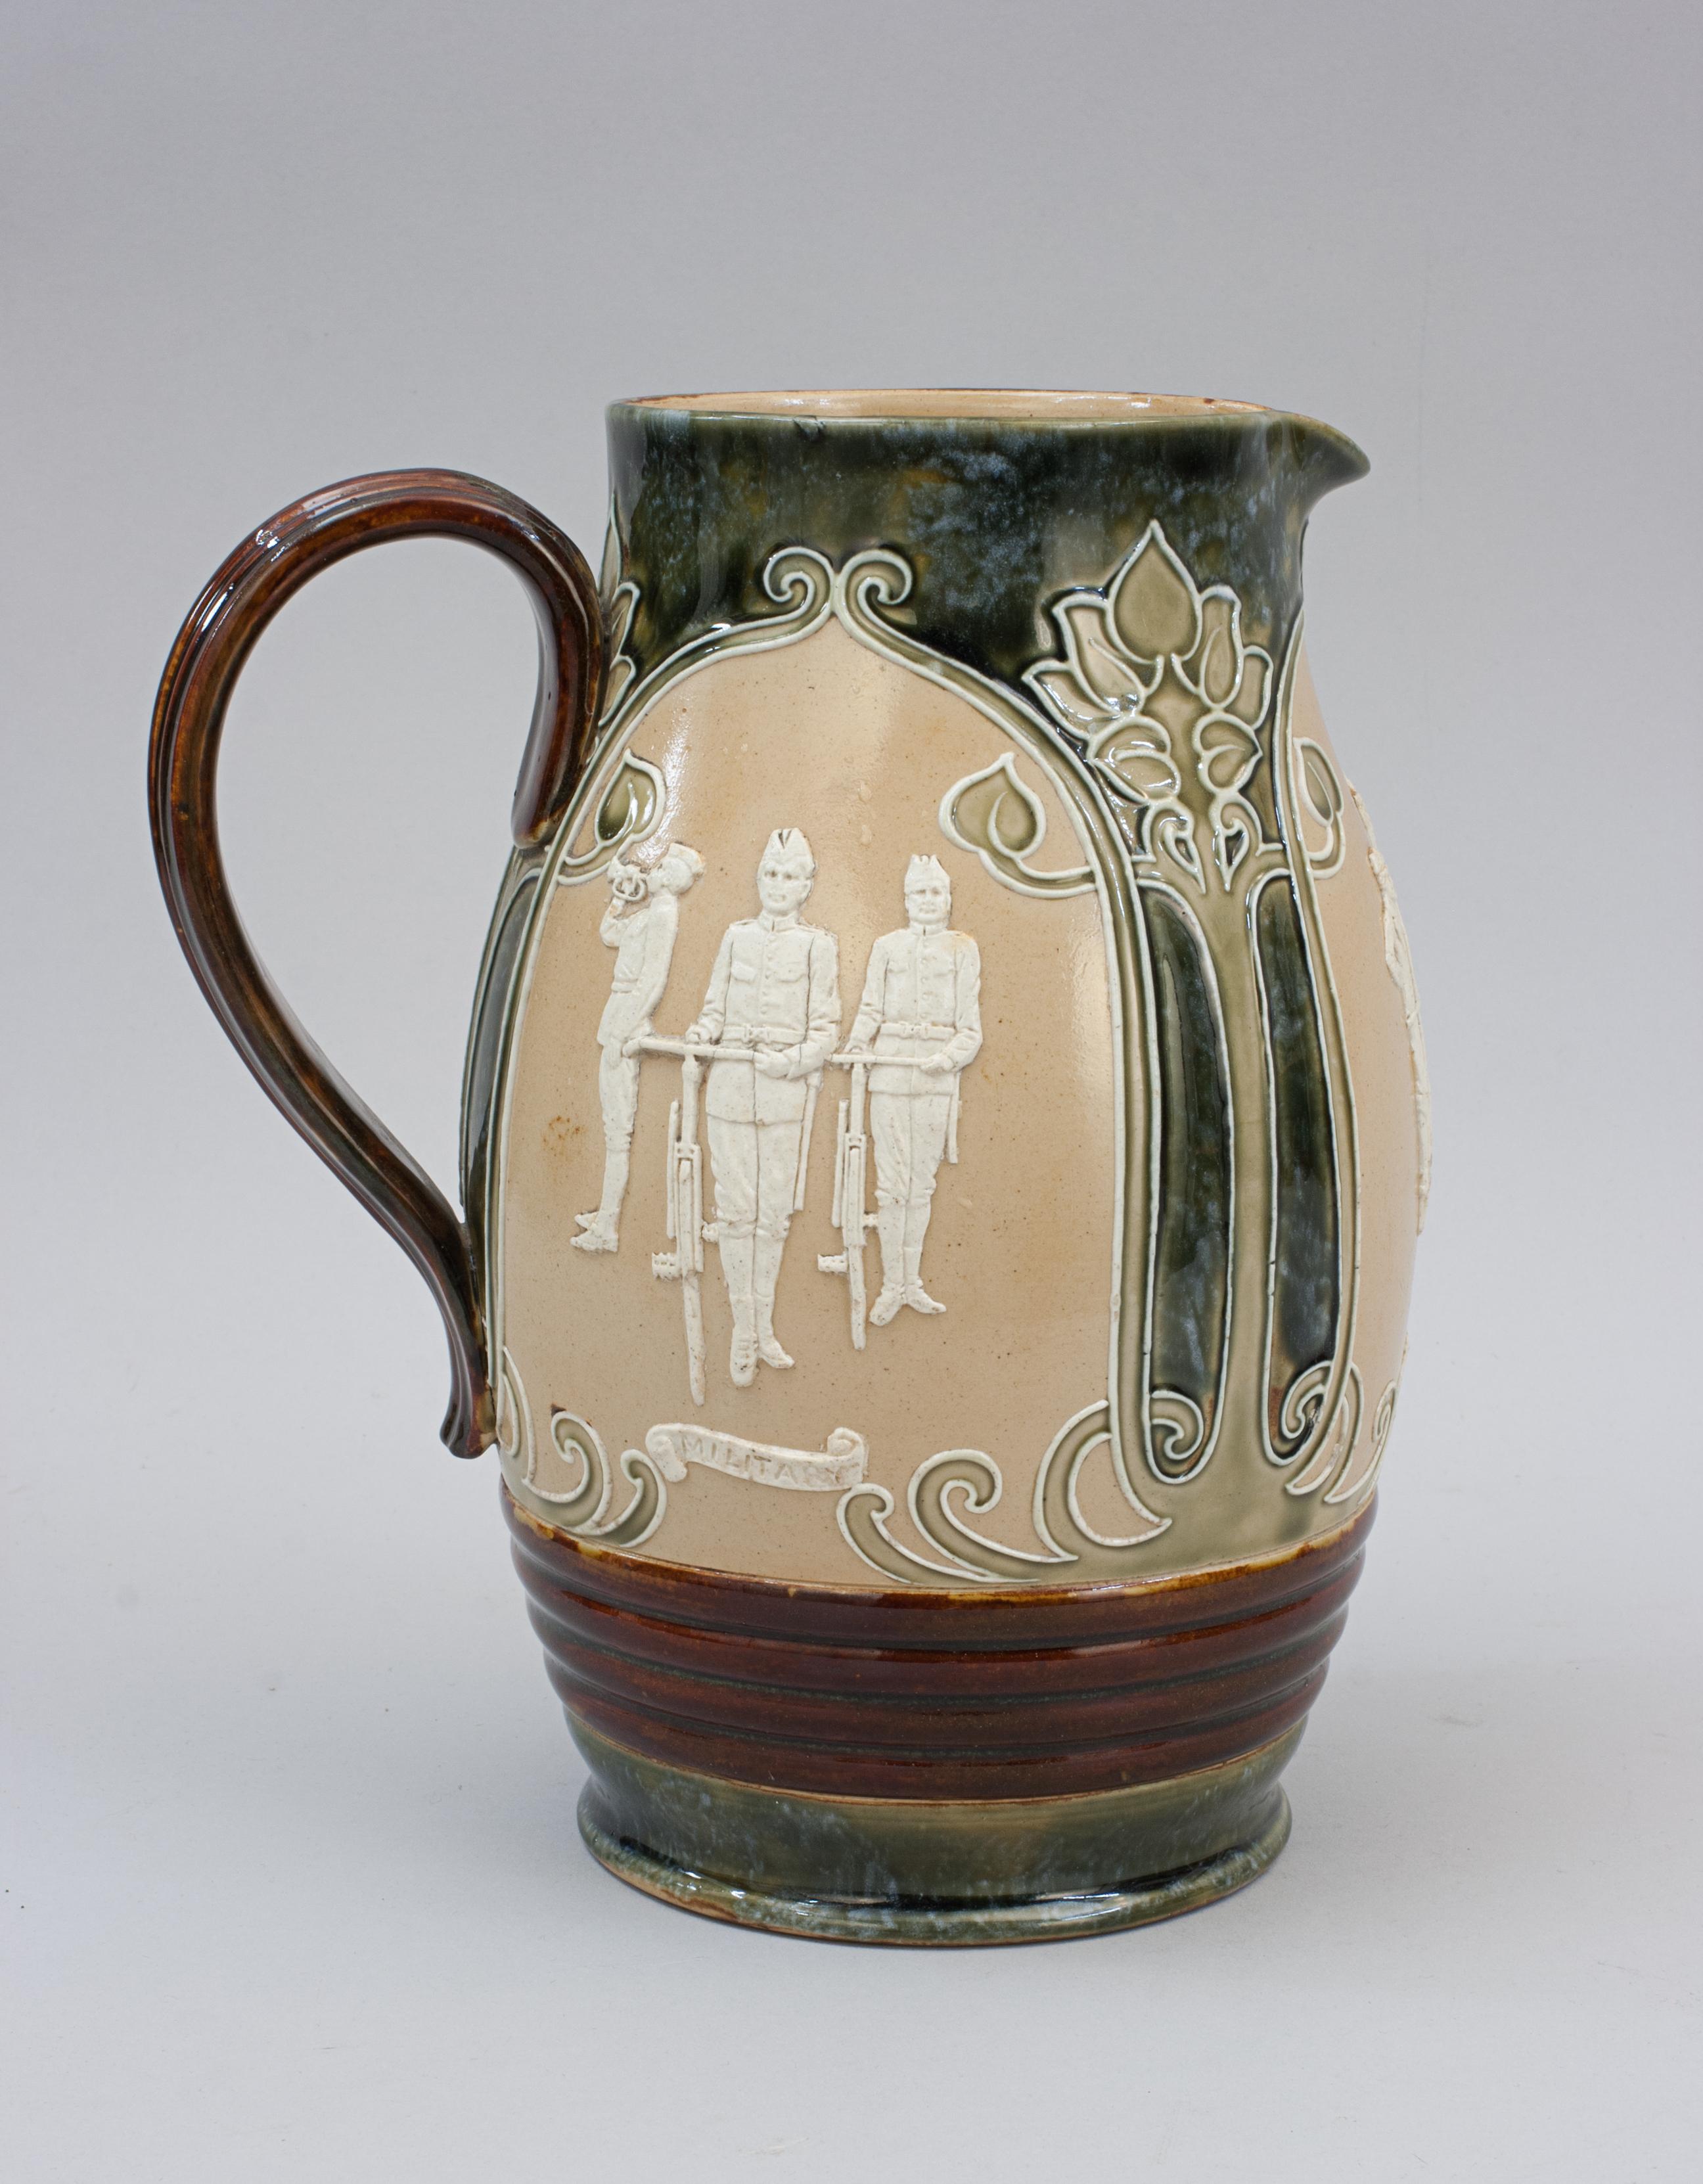 Royal Doulton Lambeth Ware Cycling Jug.
A rare Royal Doulton Lambeth stoneware jug with art nouveau design and three cycling scenes in white relief showing Men and Woman on bicycles originally designed by John Broad. The scenes are entitled: